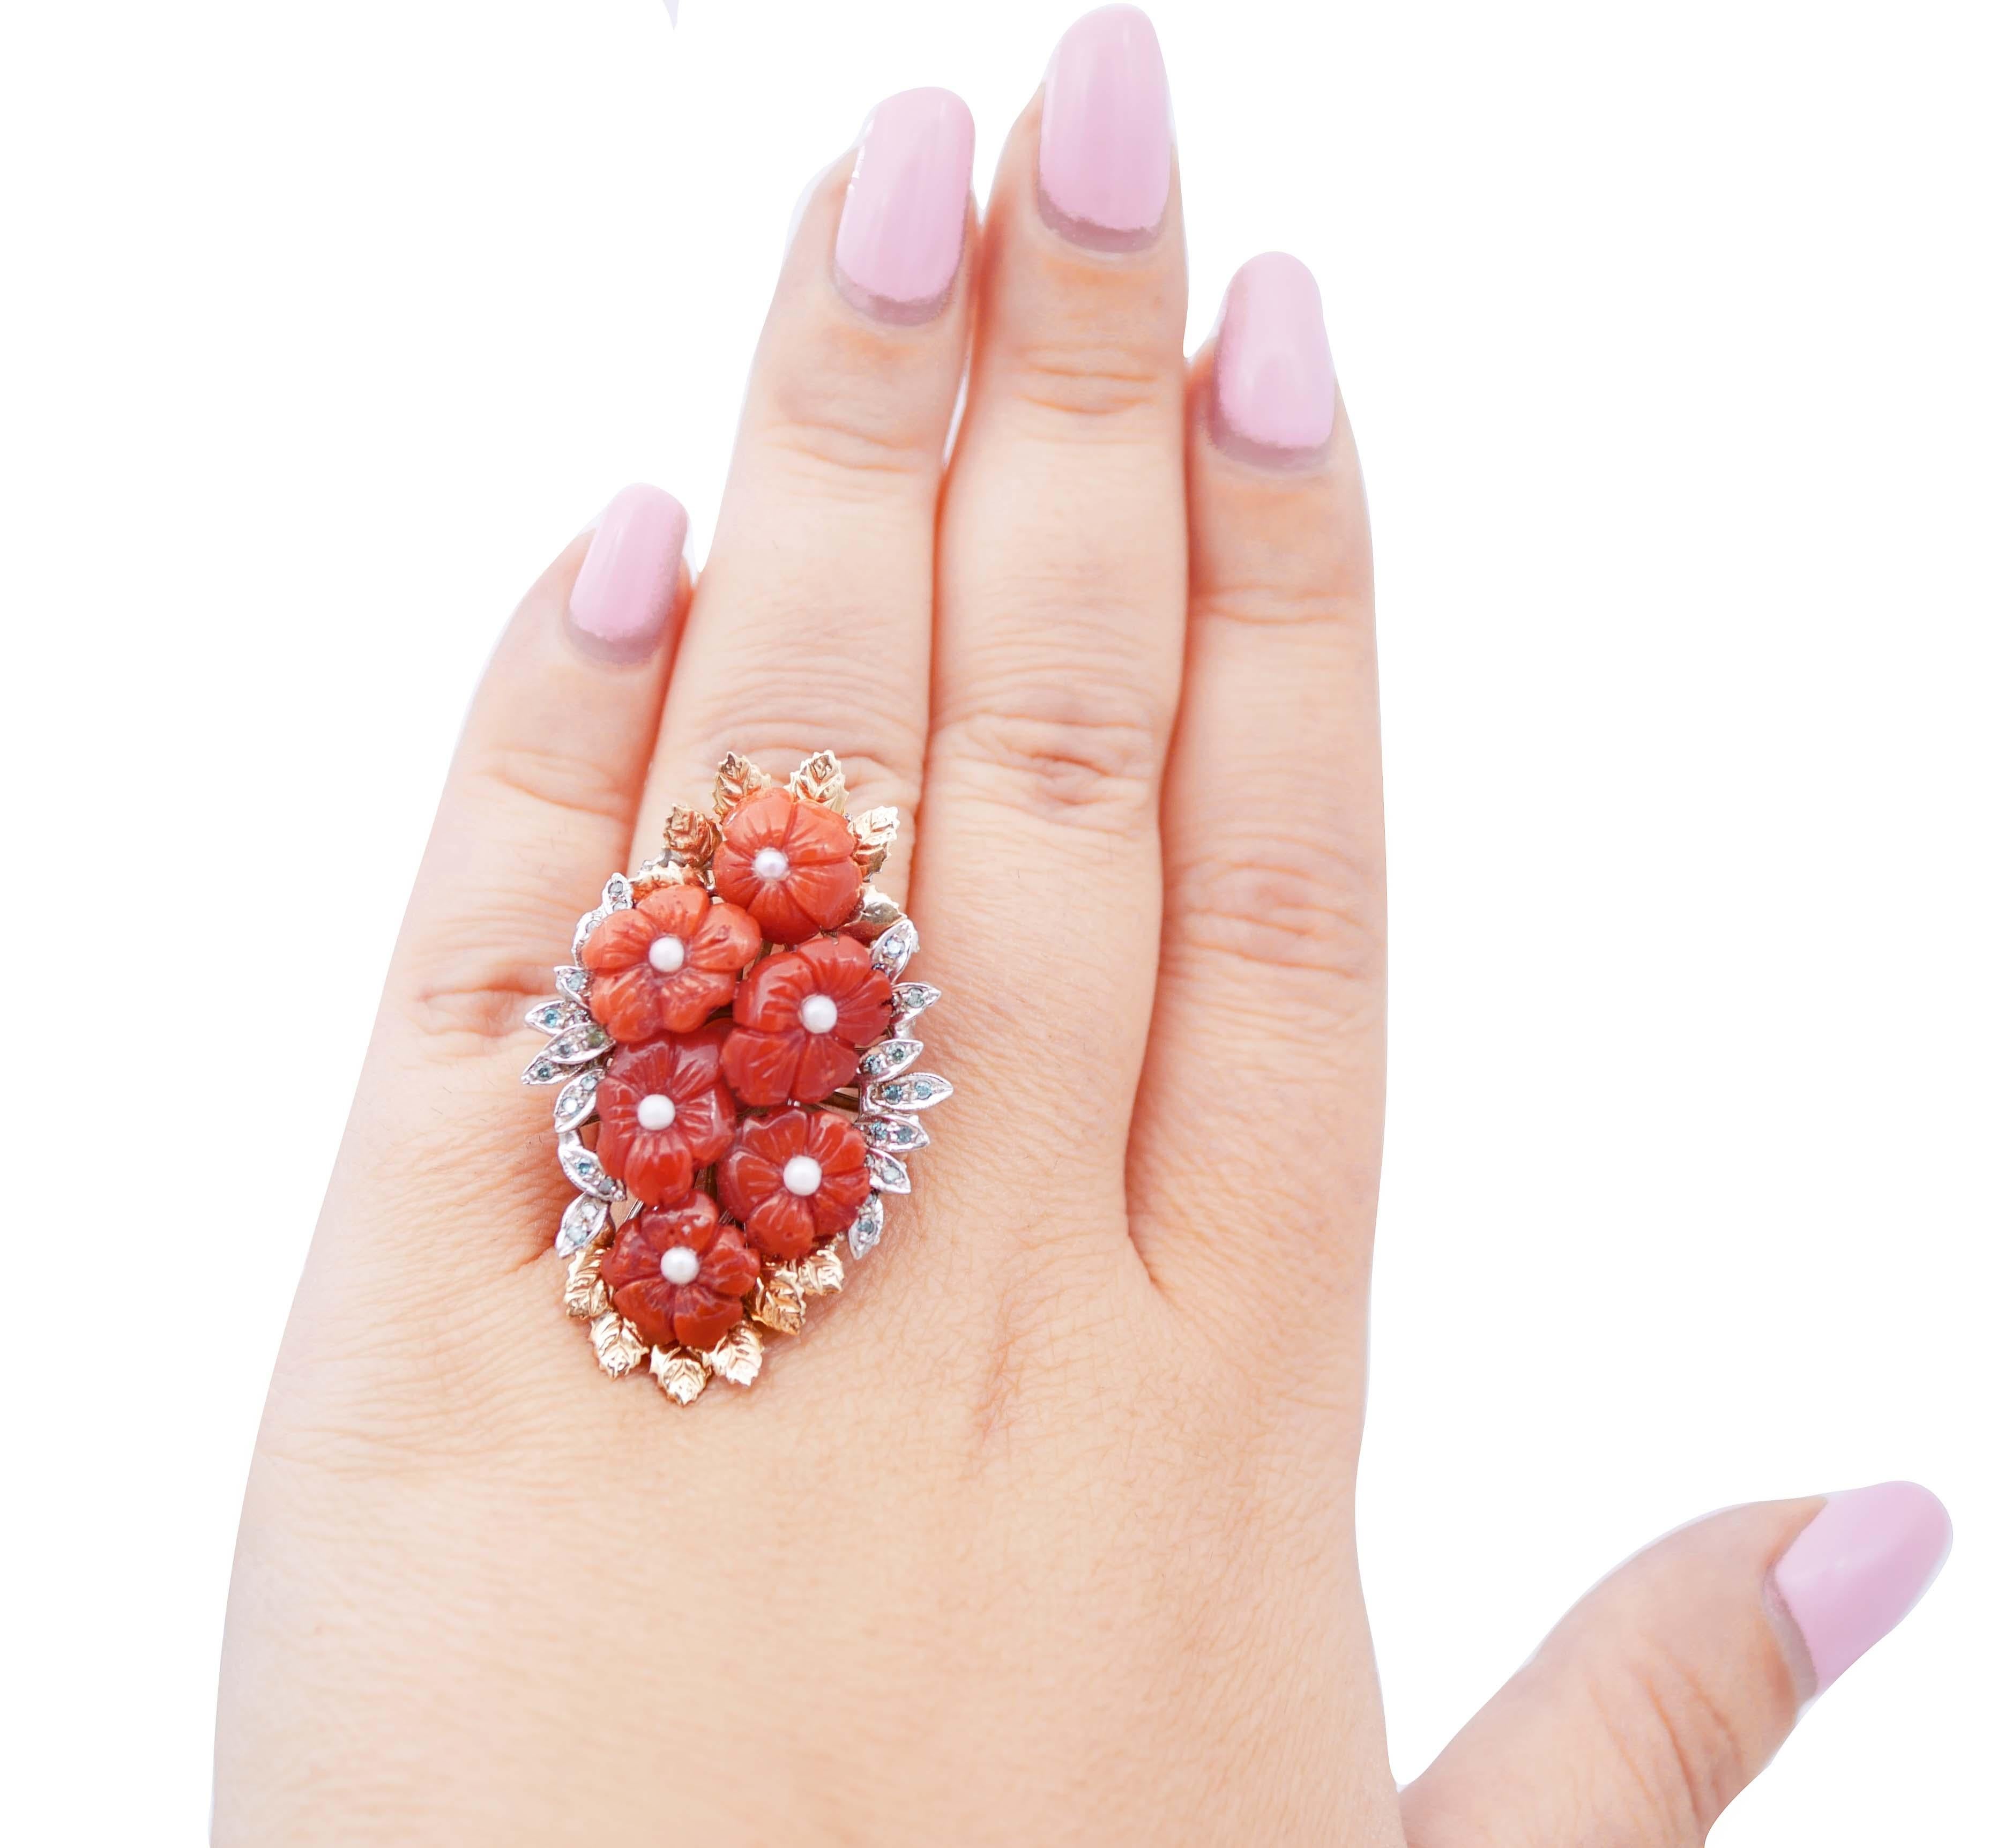 Mixed Cut Coral, Fancy Diamonds, Pearls, 14 Karat White and Rose Gold Ring For Sale